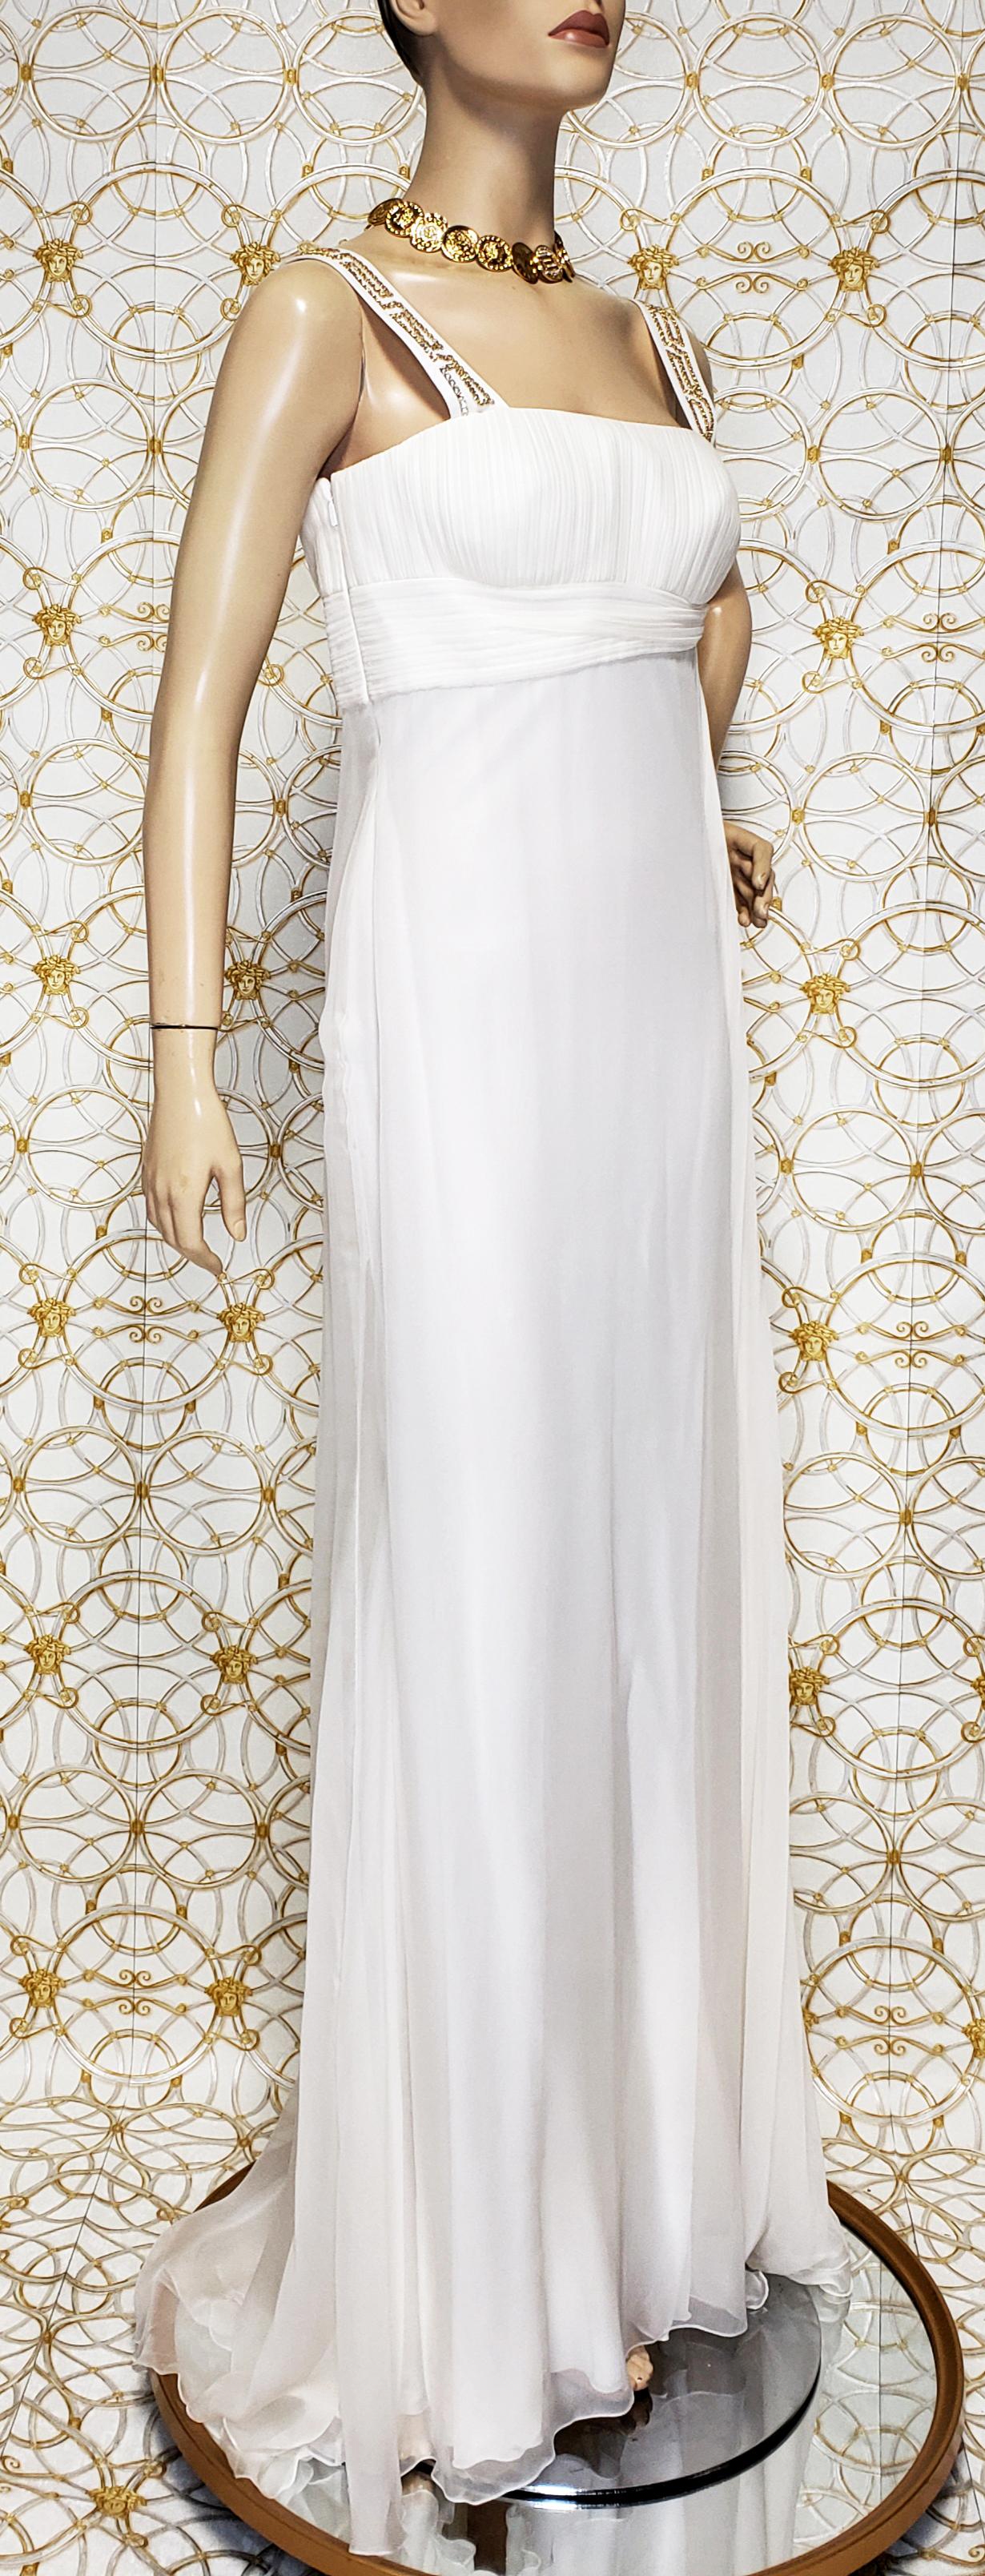 New Versace Crystal Embellished White Silk Gown 44 - 8 4